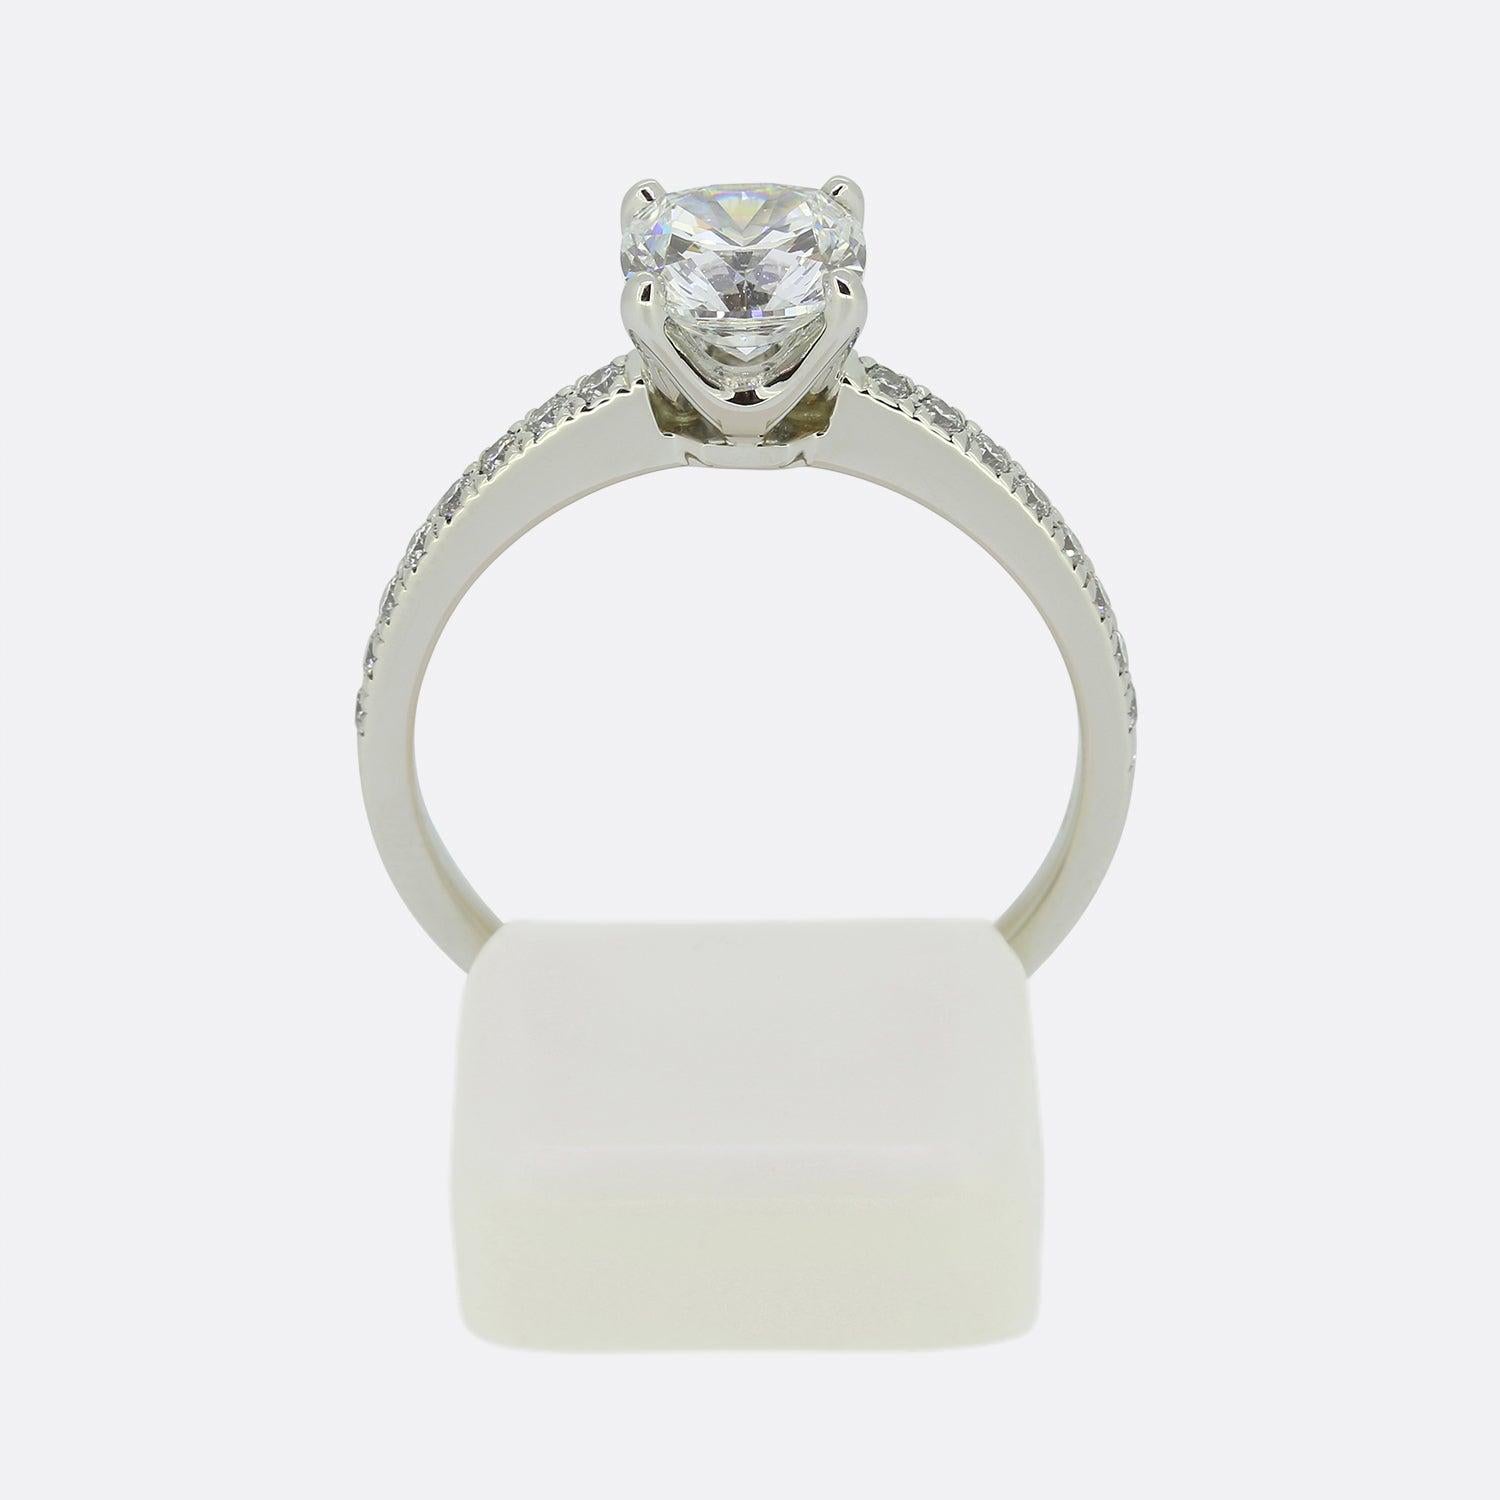 Women's Tiffany & Co. 1.04 Carat Diamond Engagement Ring For Sale